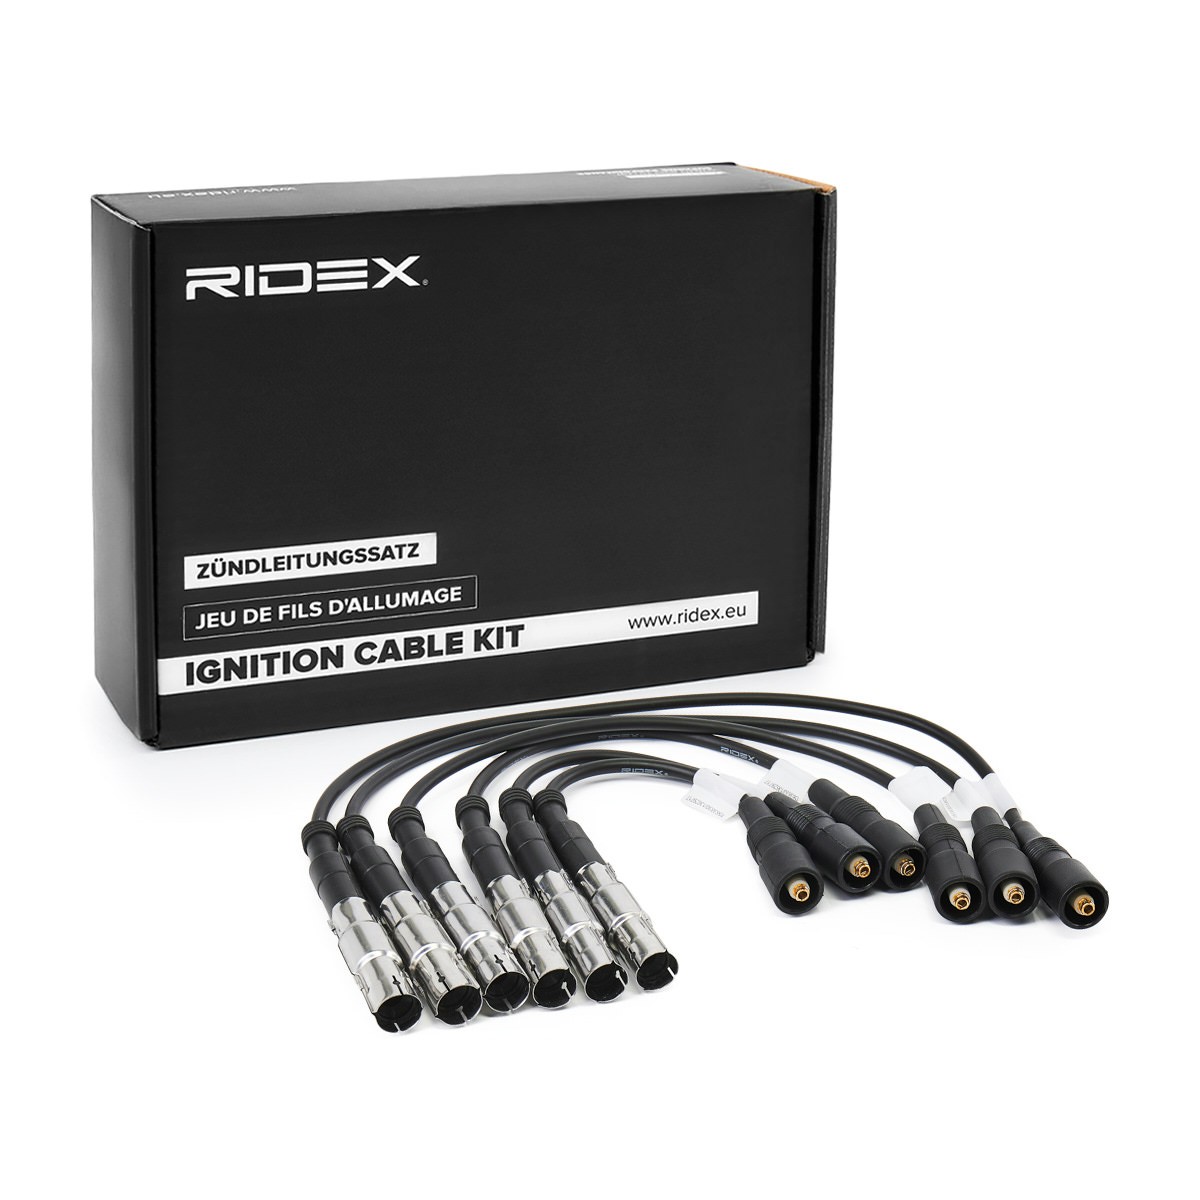 RIDEX 685I0105 Ignition Cable Kit Number of circuits: 6